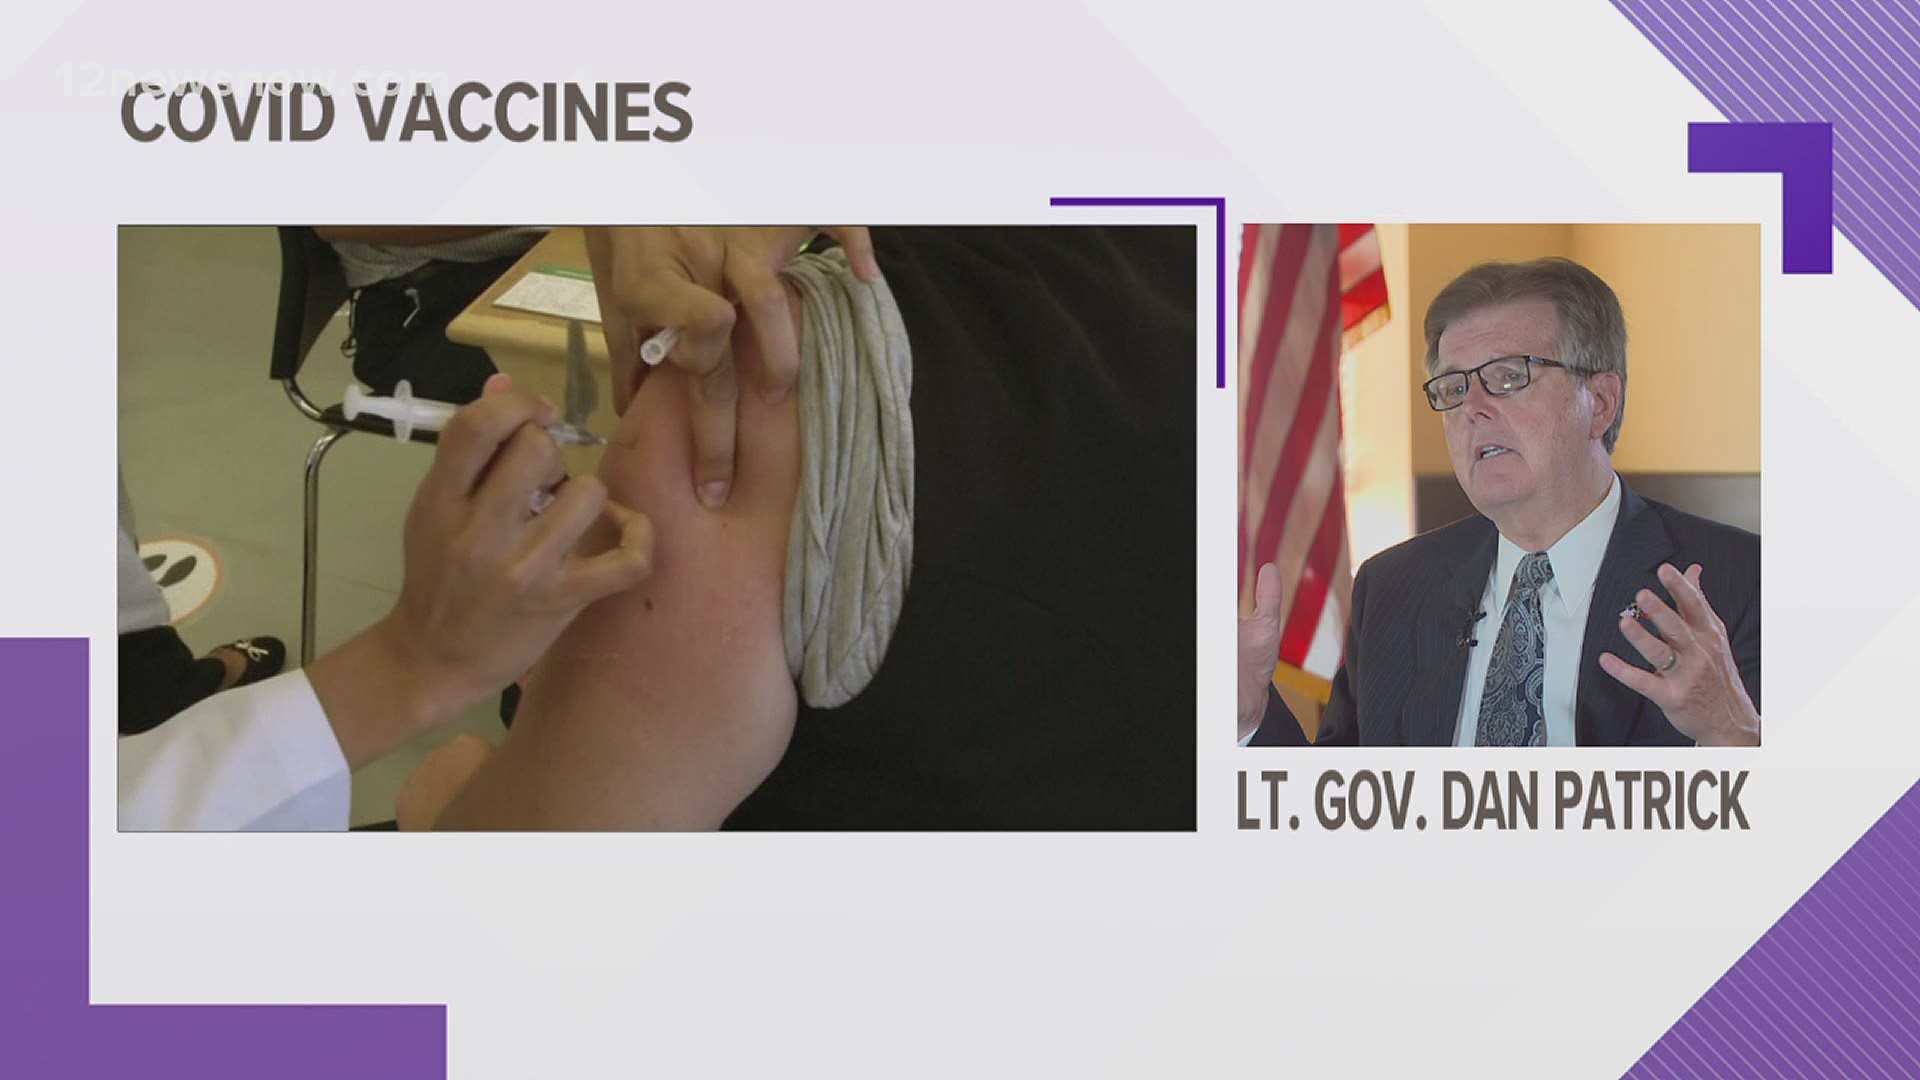 Lieutenant Governor Dan Patrick wants the state to revise its COVID-19 vaccine distribution plan.